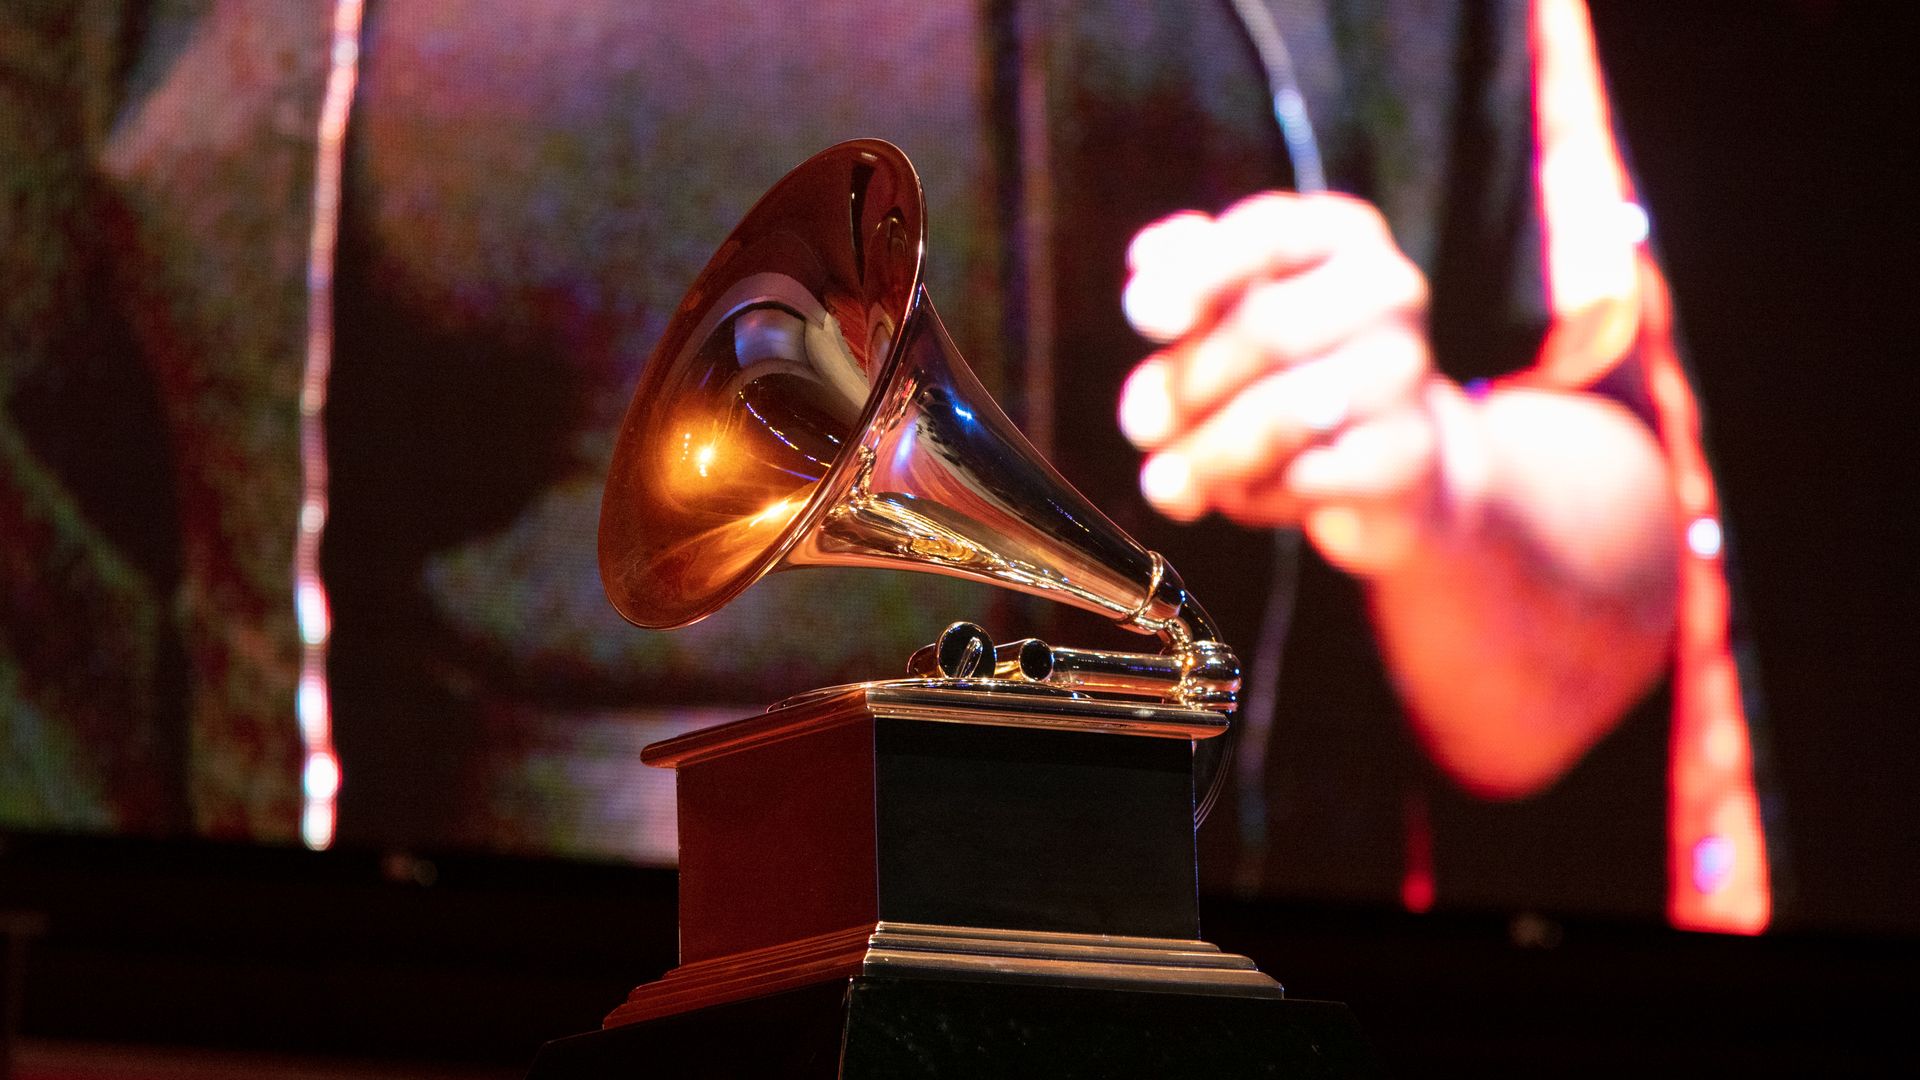 A view of a Grammy statue during a performance at the Chicago Chapter 60th Anniversary Concert at Millennium Park on September 16, 2021 in Chicago, Illinois